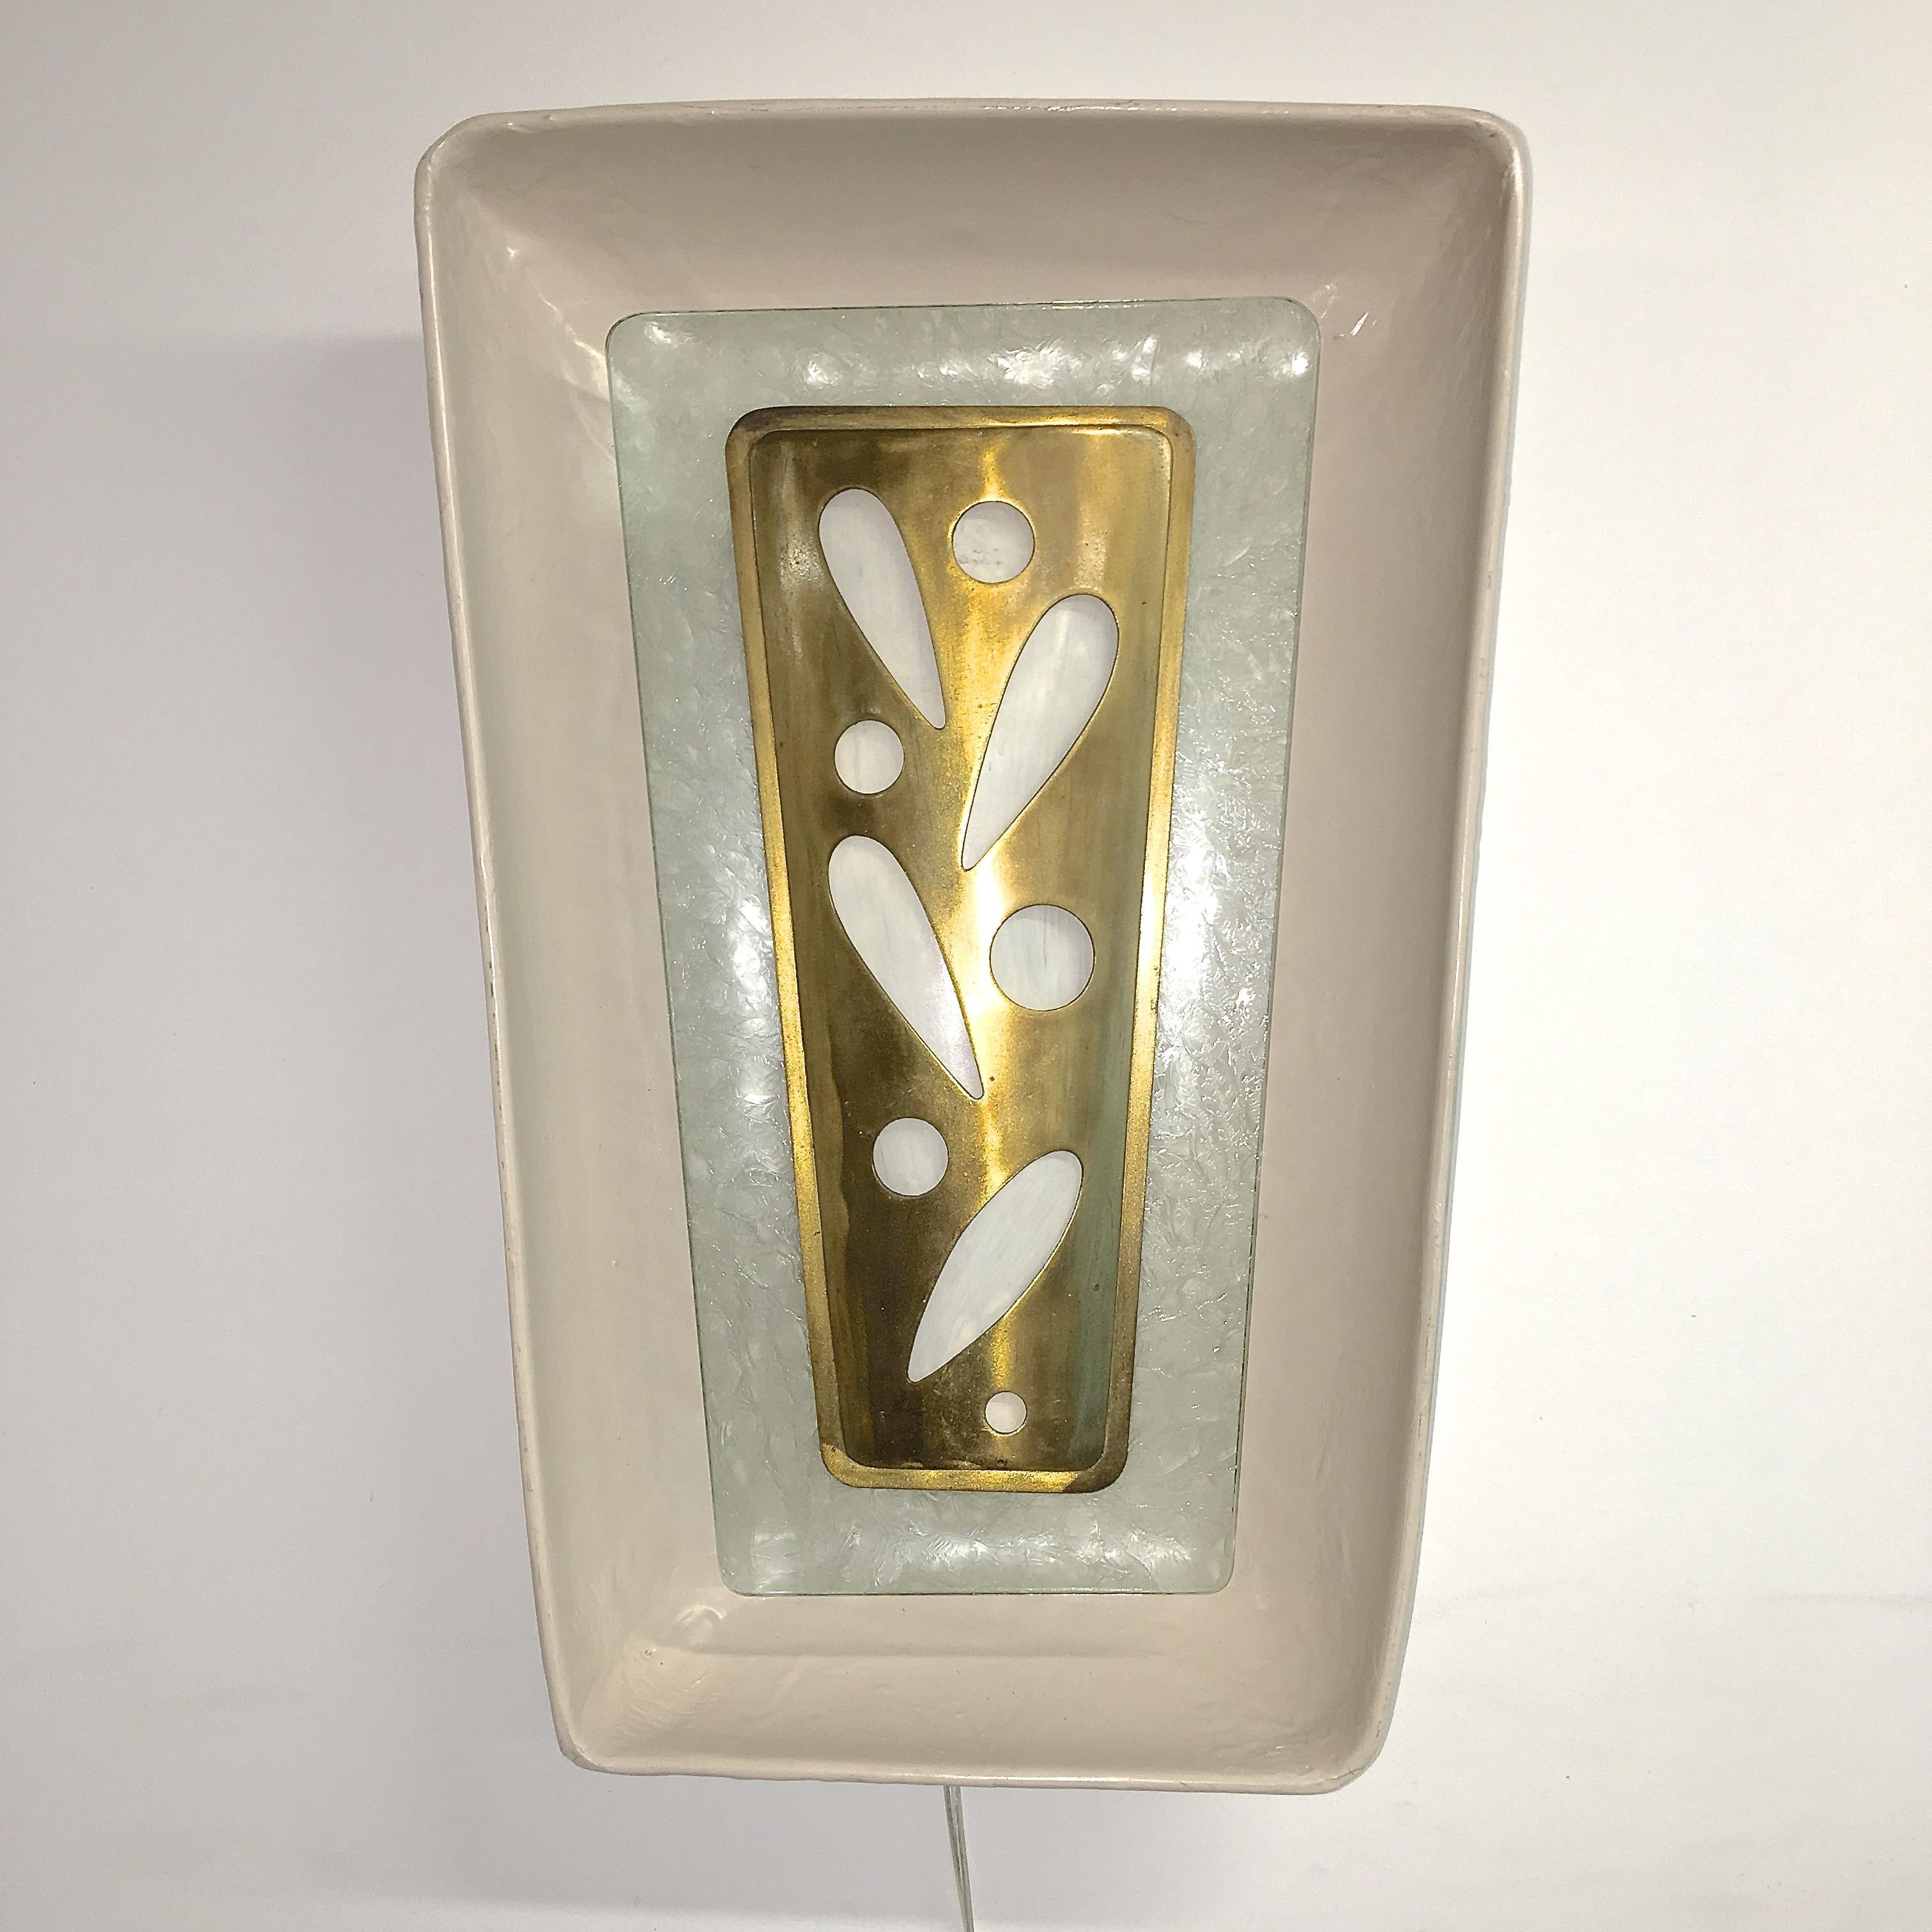 Trapezoidal shaped wall mounted niche-form light fixture designed by Gio Ponti for the m/s Augustus transatlantic ocean liner.
From the Atlantico, tourist class dining room aboard the Augustus. We previously sold one of the large round ceiling